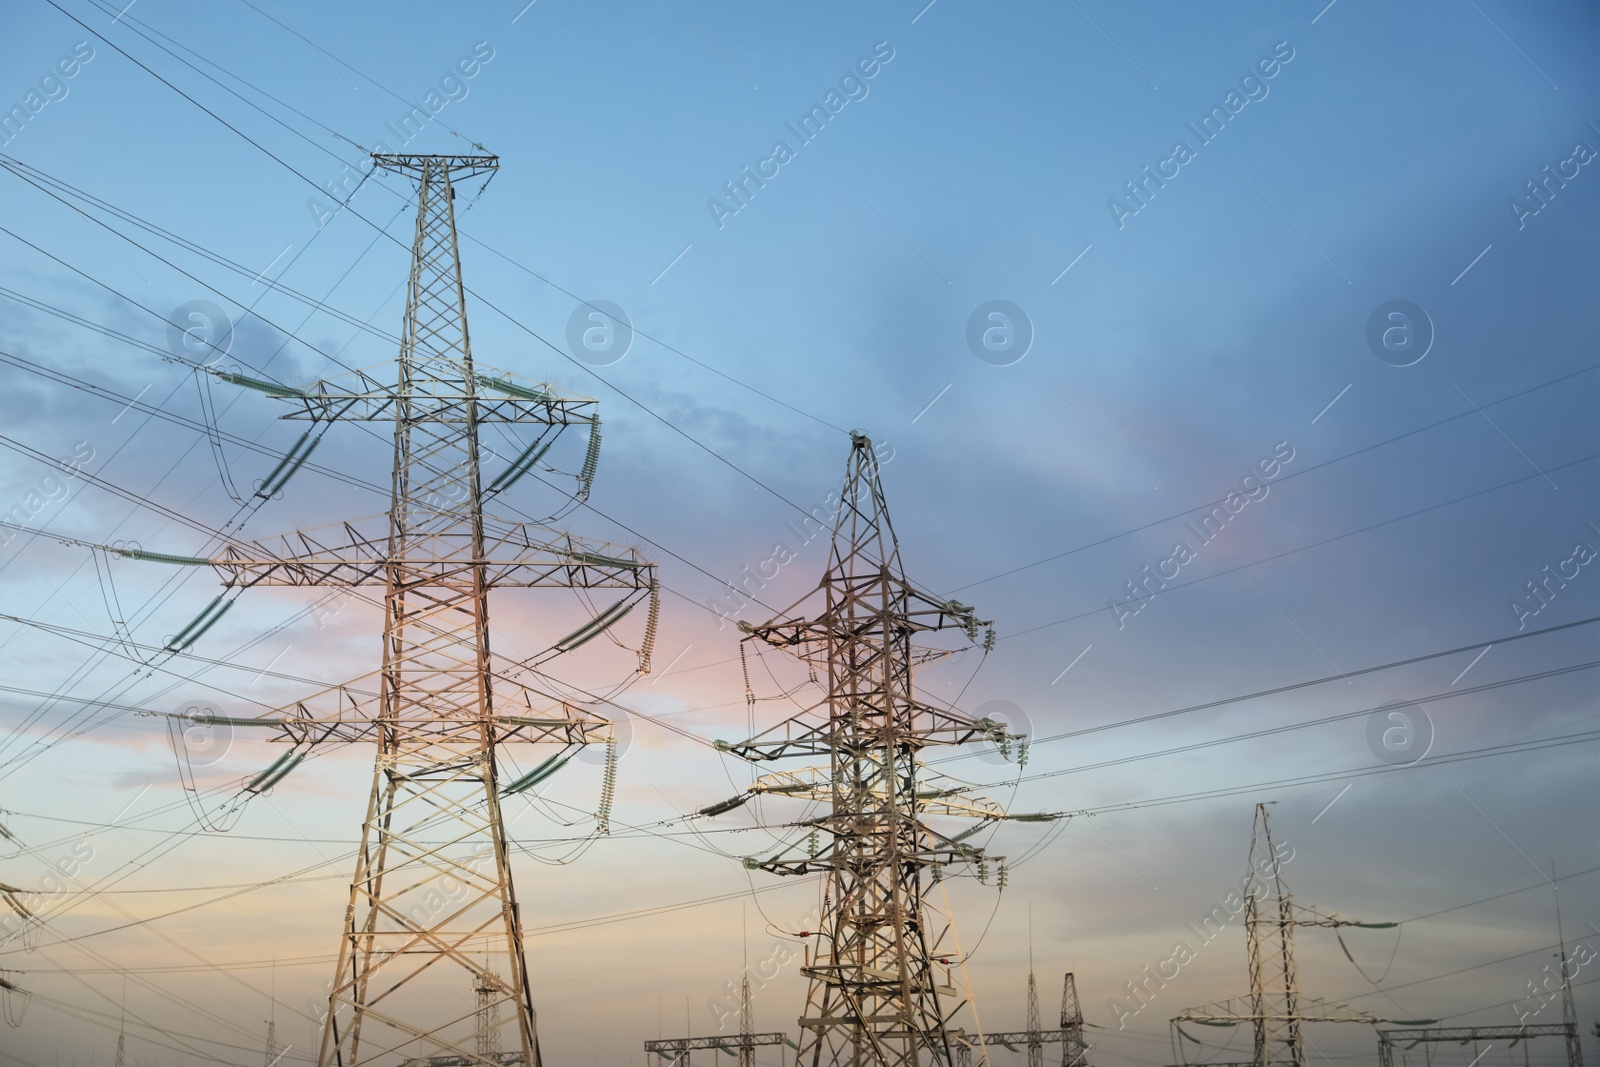 Photo of High voltage towers against cloudy sky at sunset